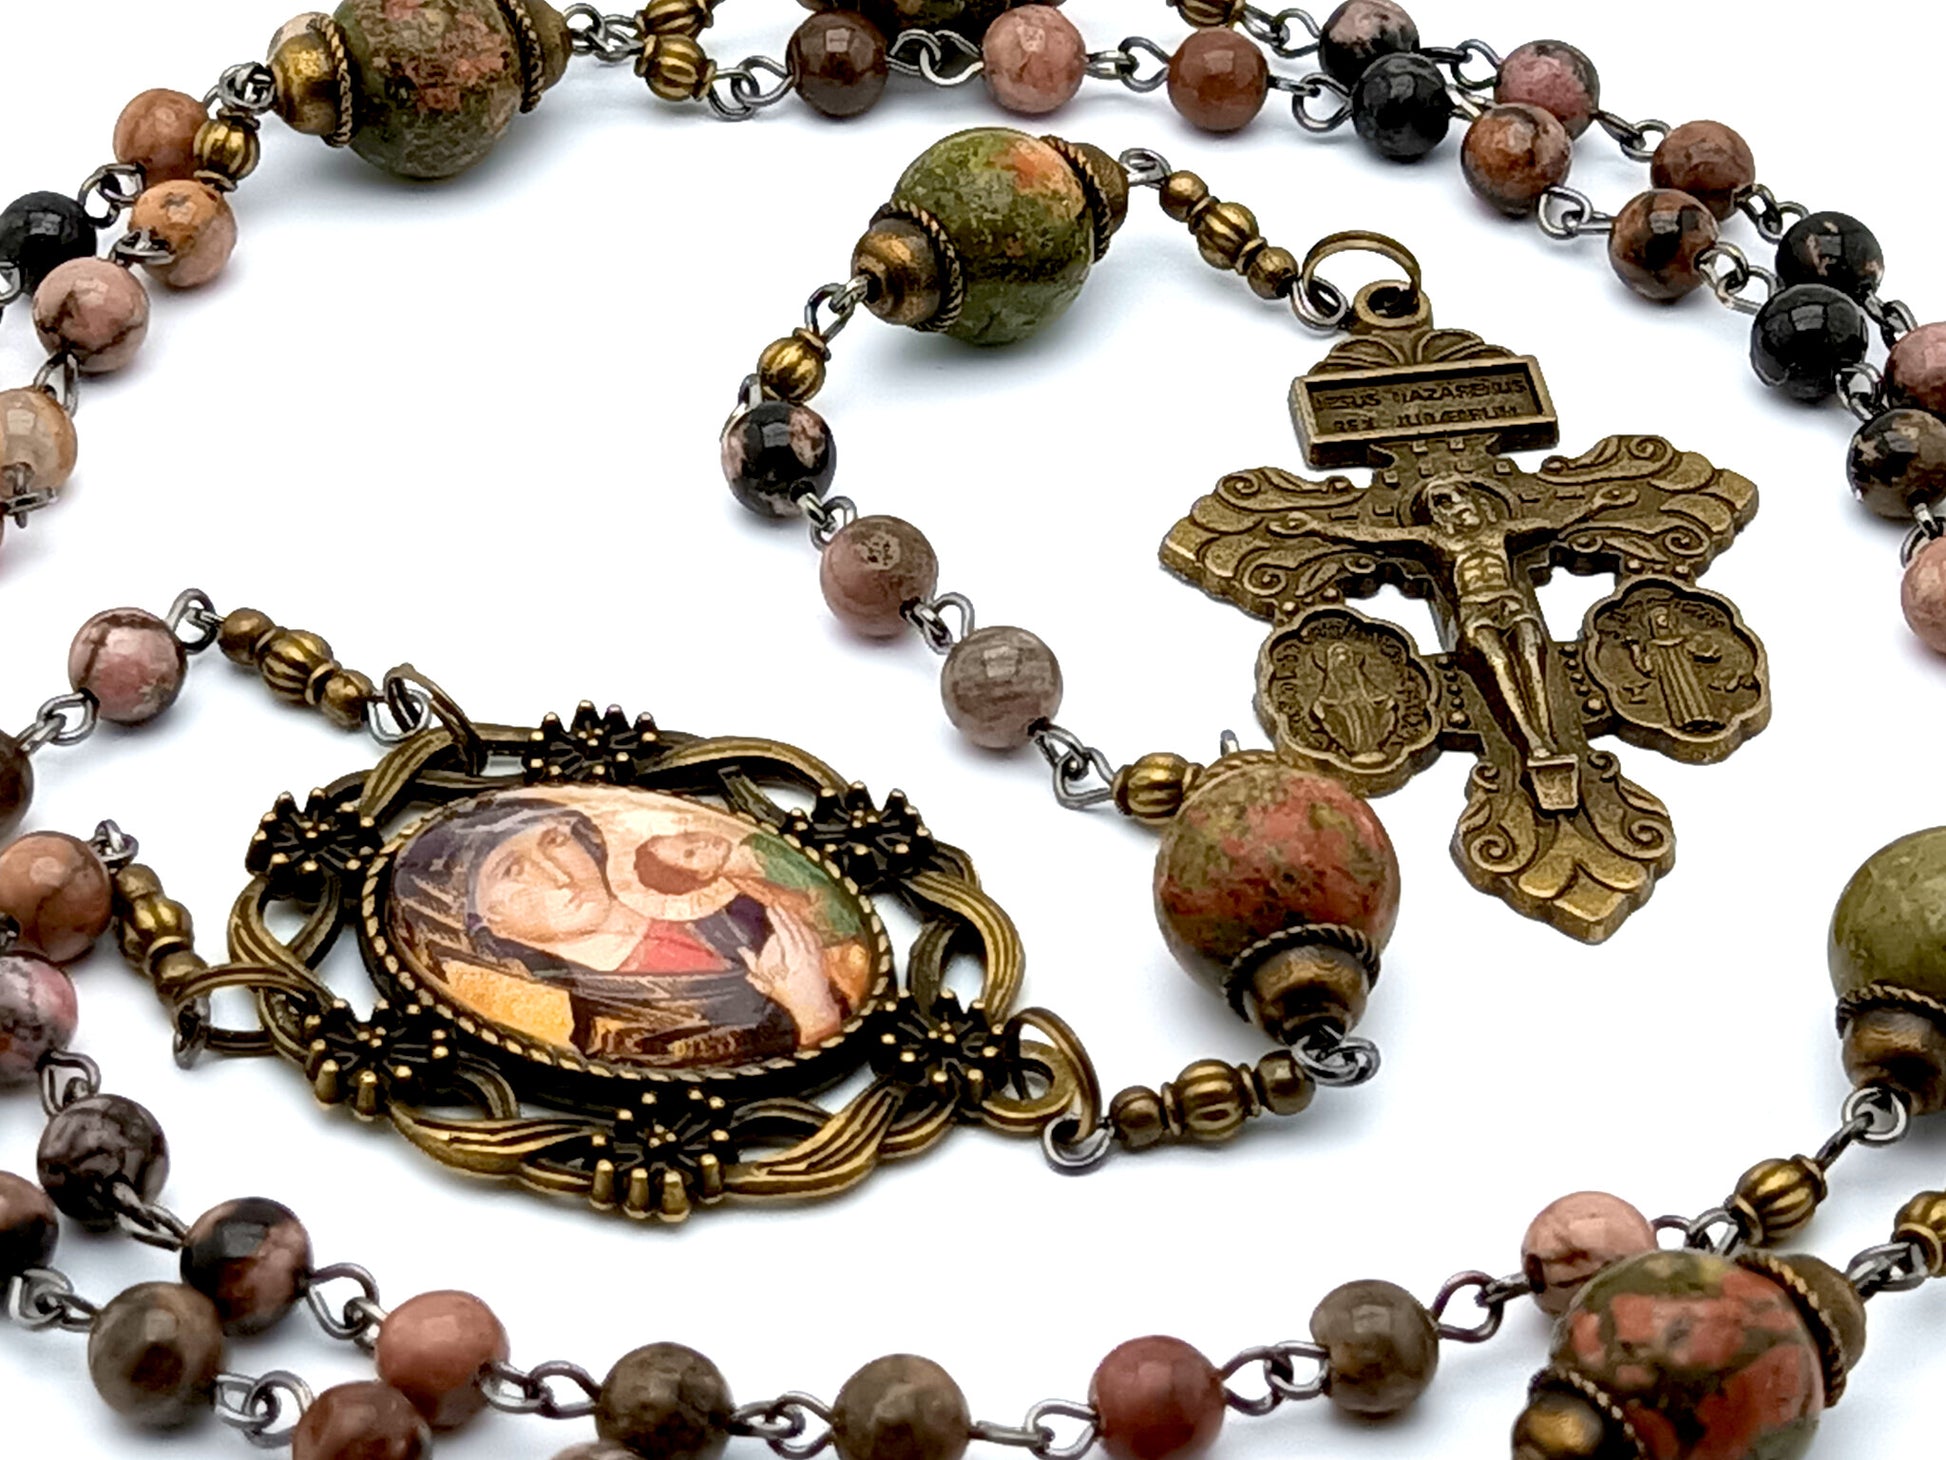 Vintage style Our Lady of Perpetual Help unique rosary beads with rhodonite gemstone beads and brass medal Miraculous medal crucifix.